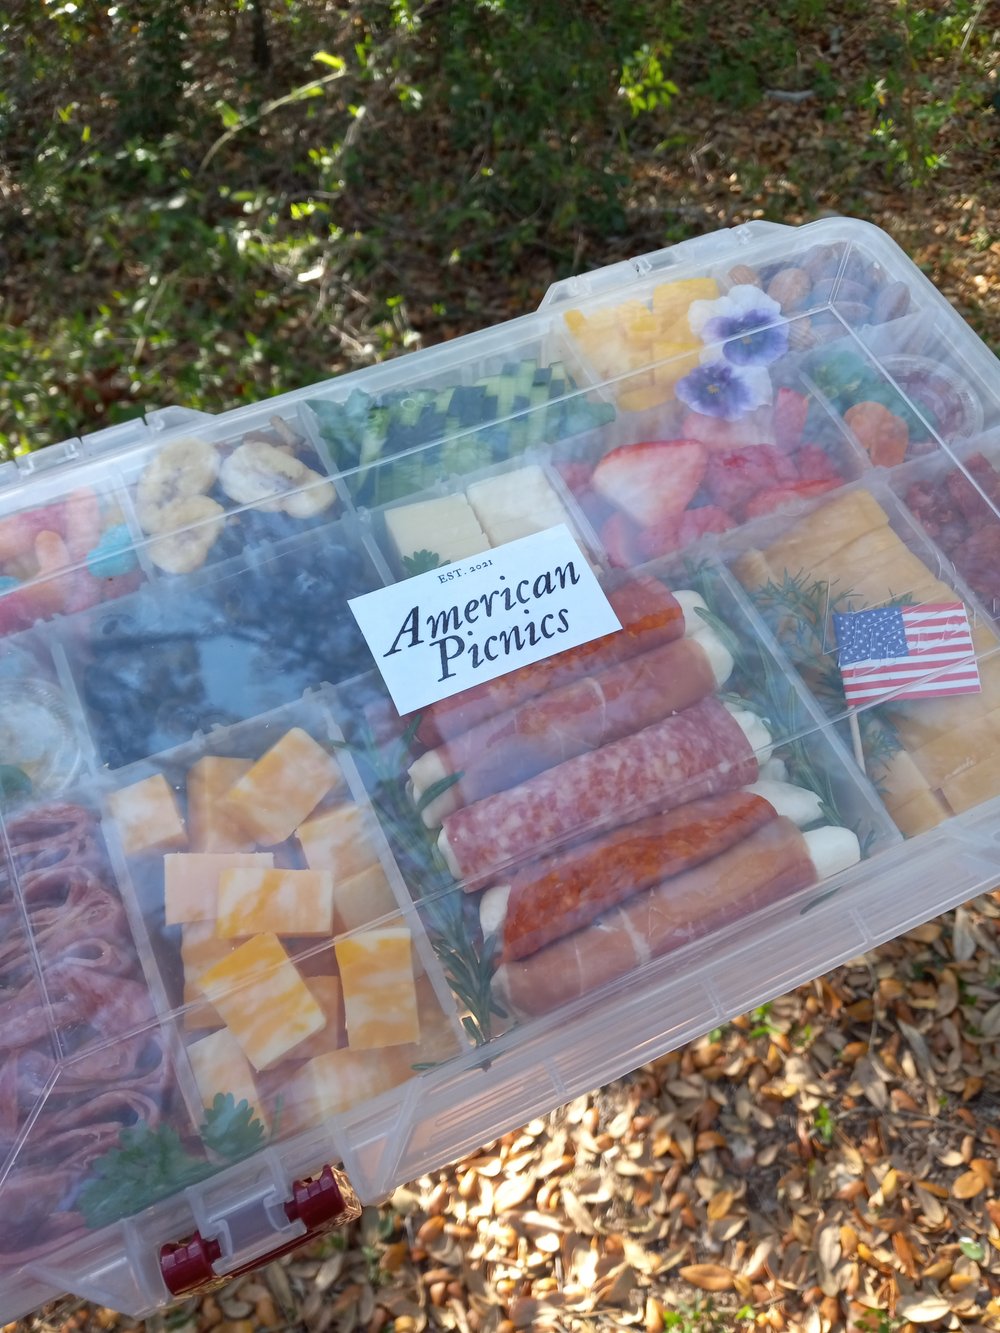 SNACKLE BOX!!! - Montana Hunting and Fishing Information